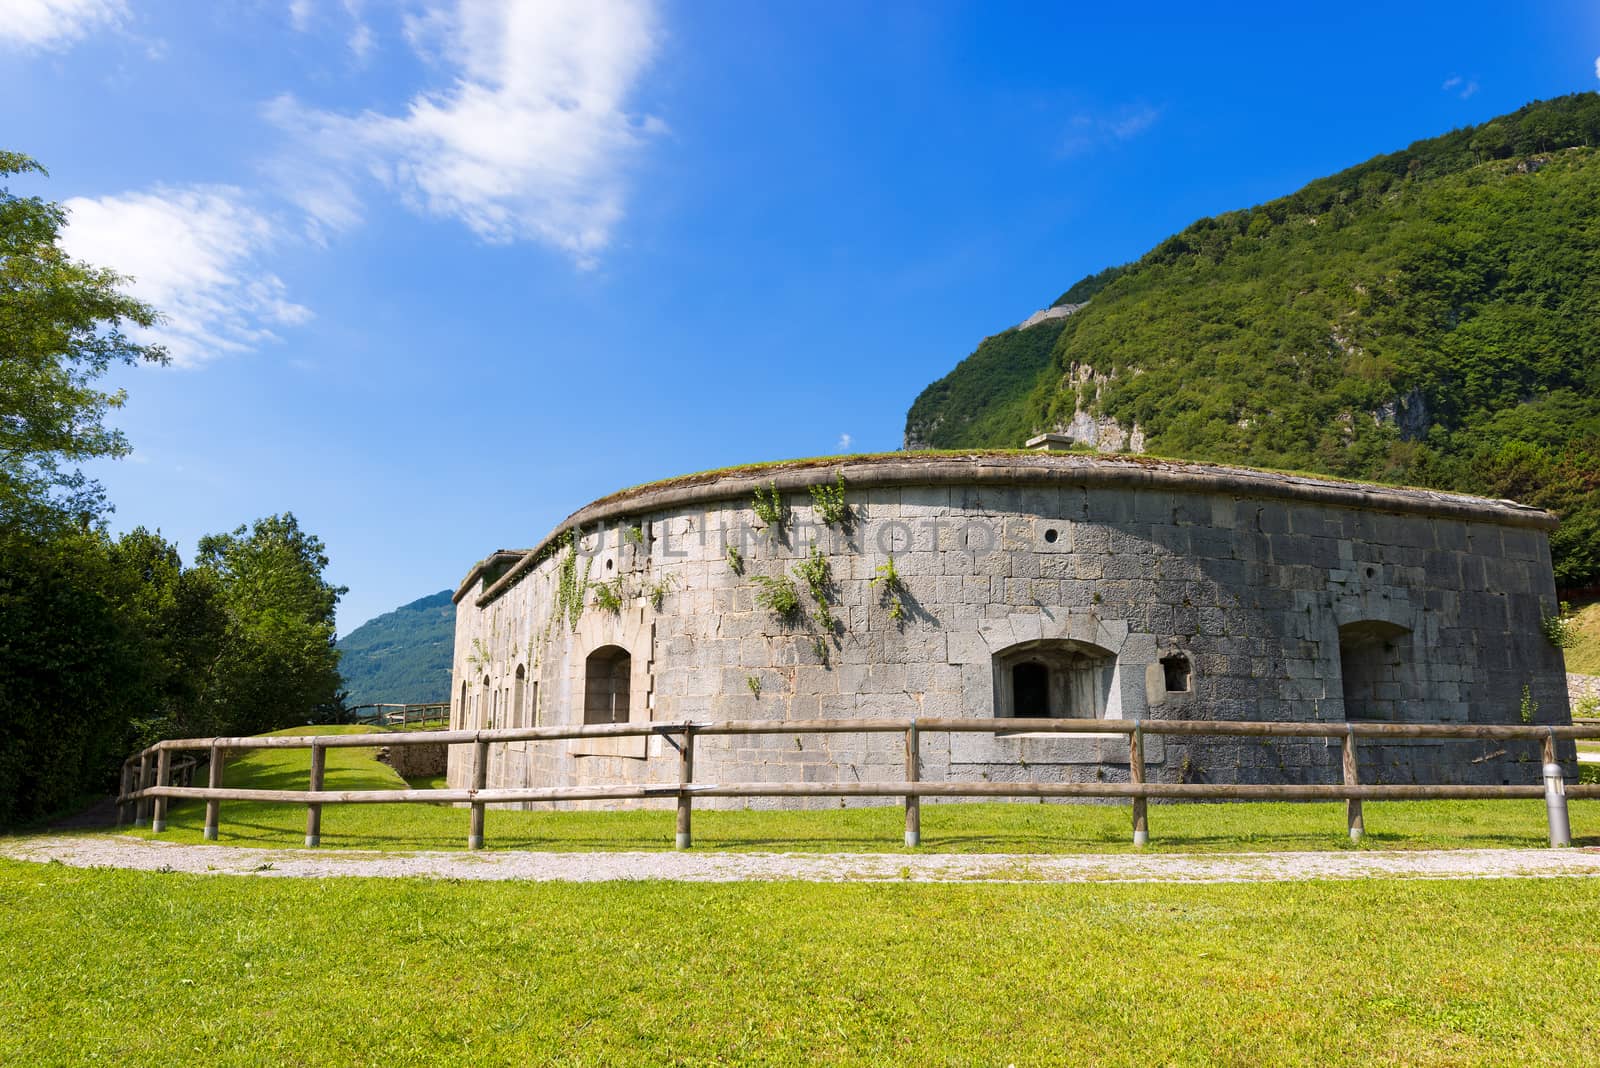 Fort Larino (1860) in Lardaro, Trentino, Italy. Austro Hungarian fortress of first world war built in Chiese Valley